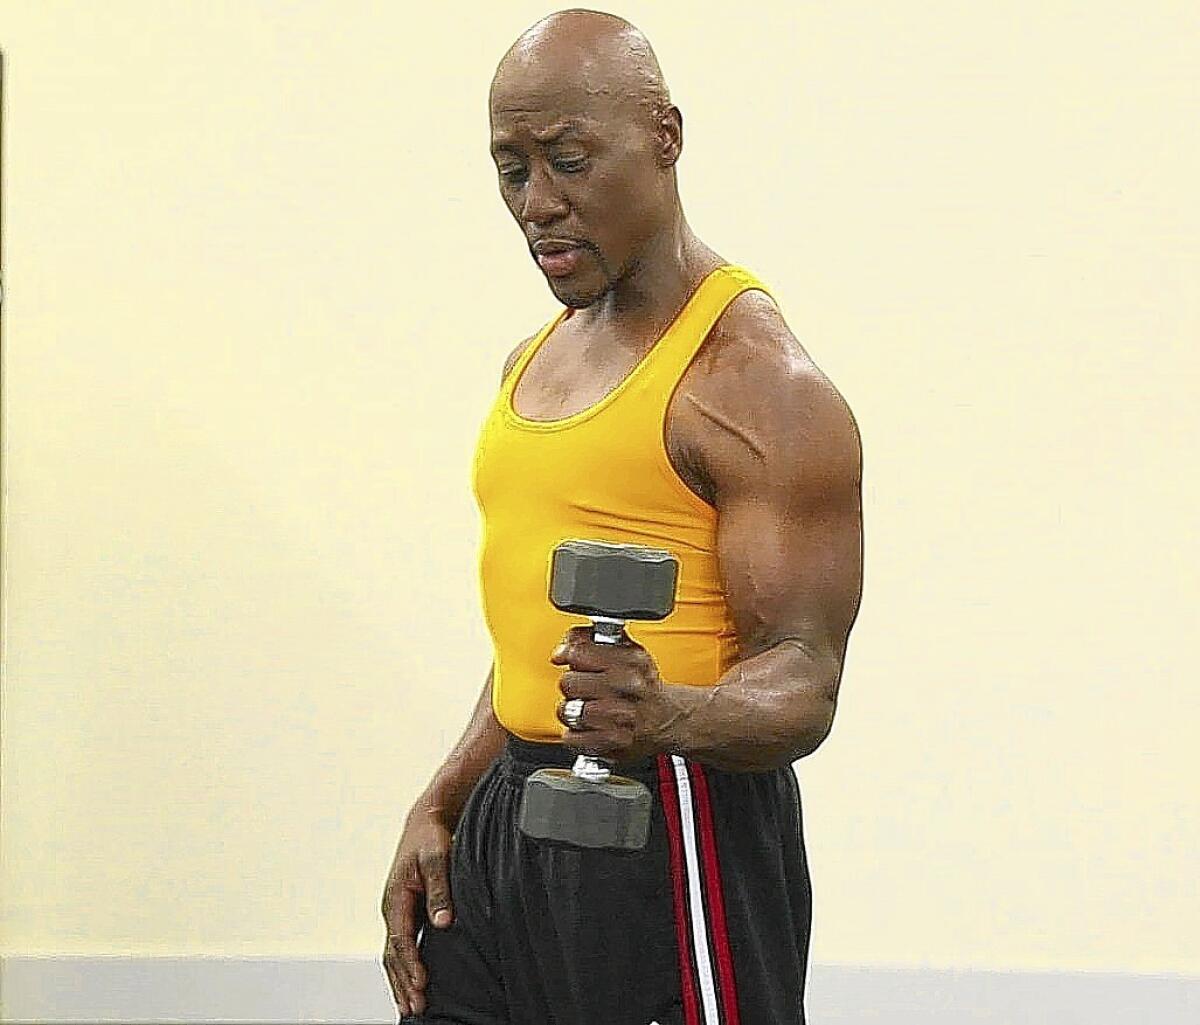 rotator cuff exercises with dumbbells